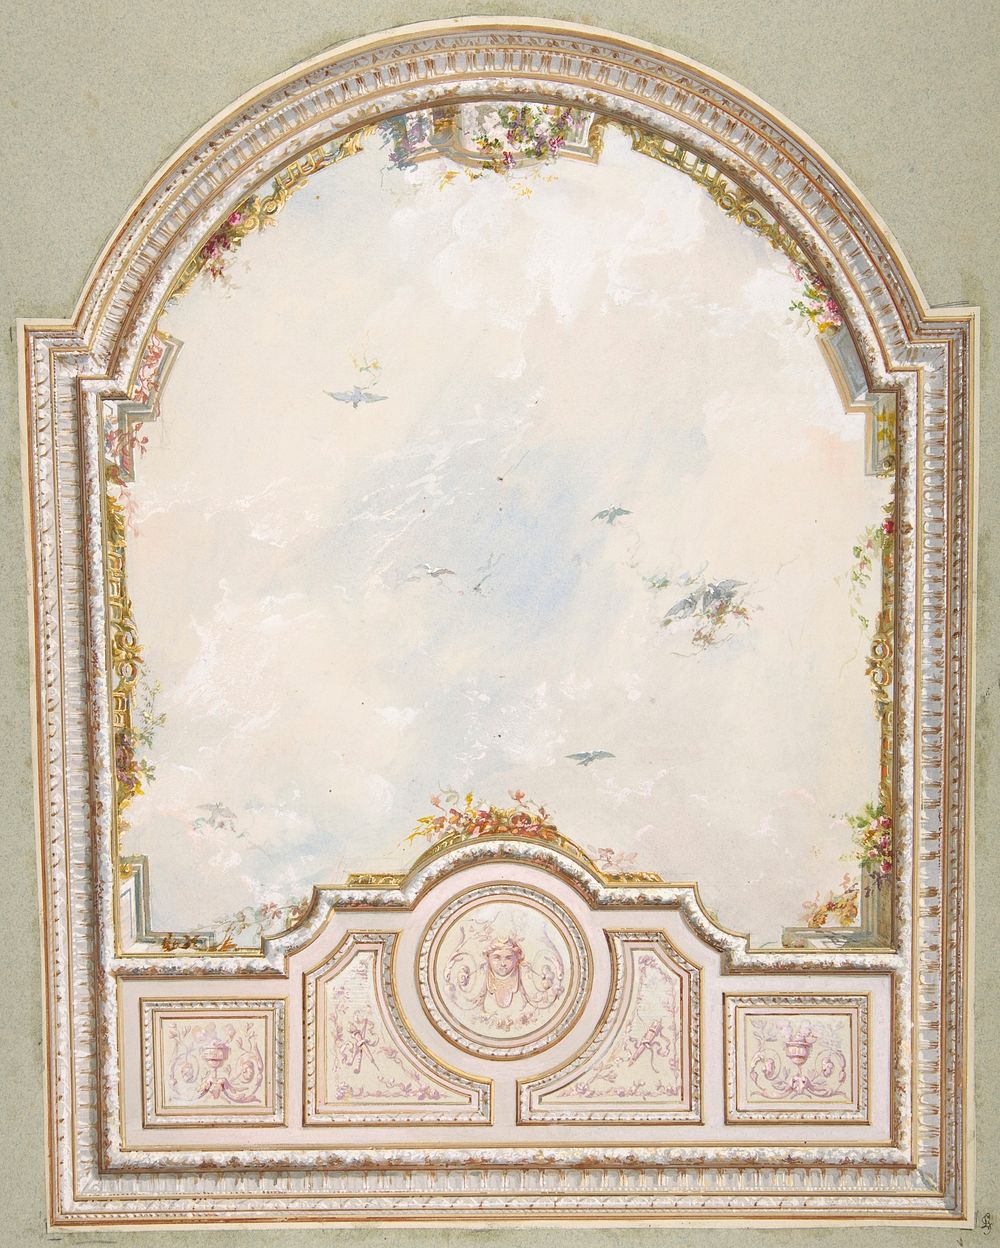 Deign for a ceiling a a trompe l'oeil sky by Jules-Edmond-Charles Lachaise and Eugène-Pierre Gourdet